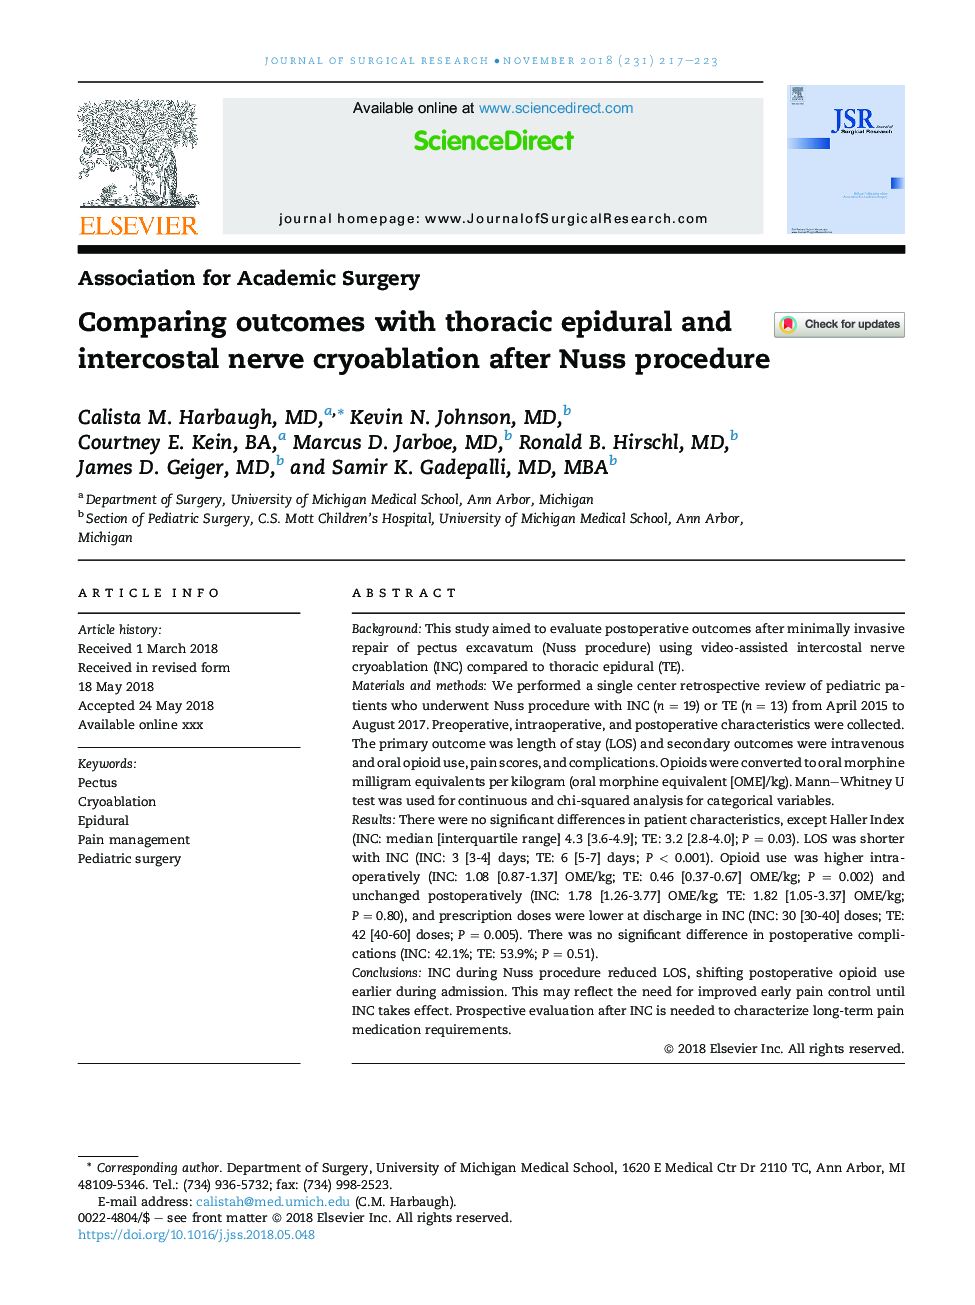 Comparing outcomes with thoracic epidural and intercostal nerve cryoablation after Nuss procedure